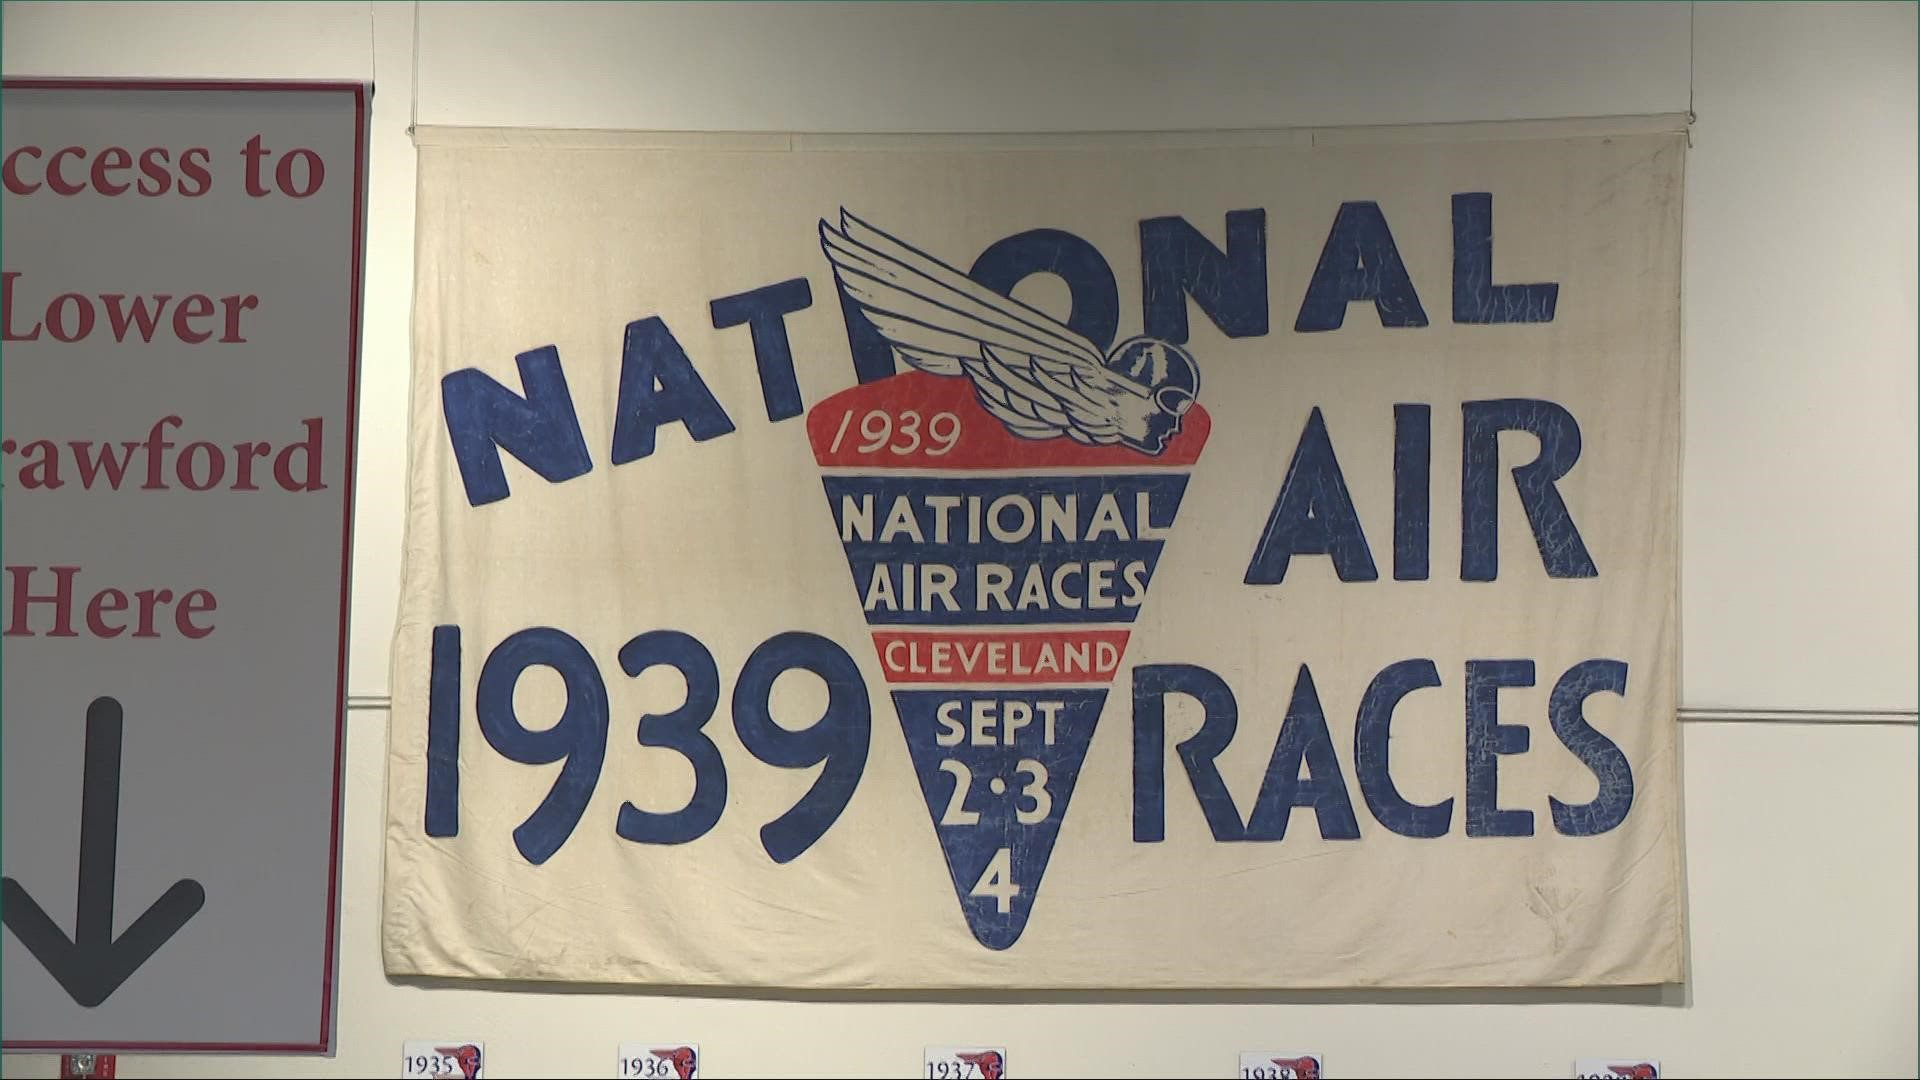 The National Air Races found a home in Cleveland back in 1929, becoming the first aeronautical wonder to woo Northeast Ohio crowds.